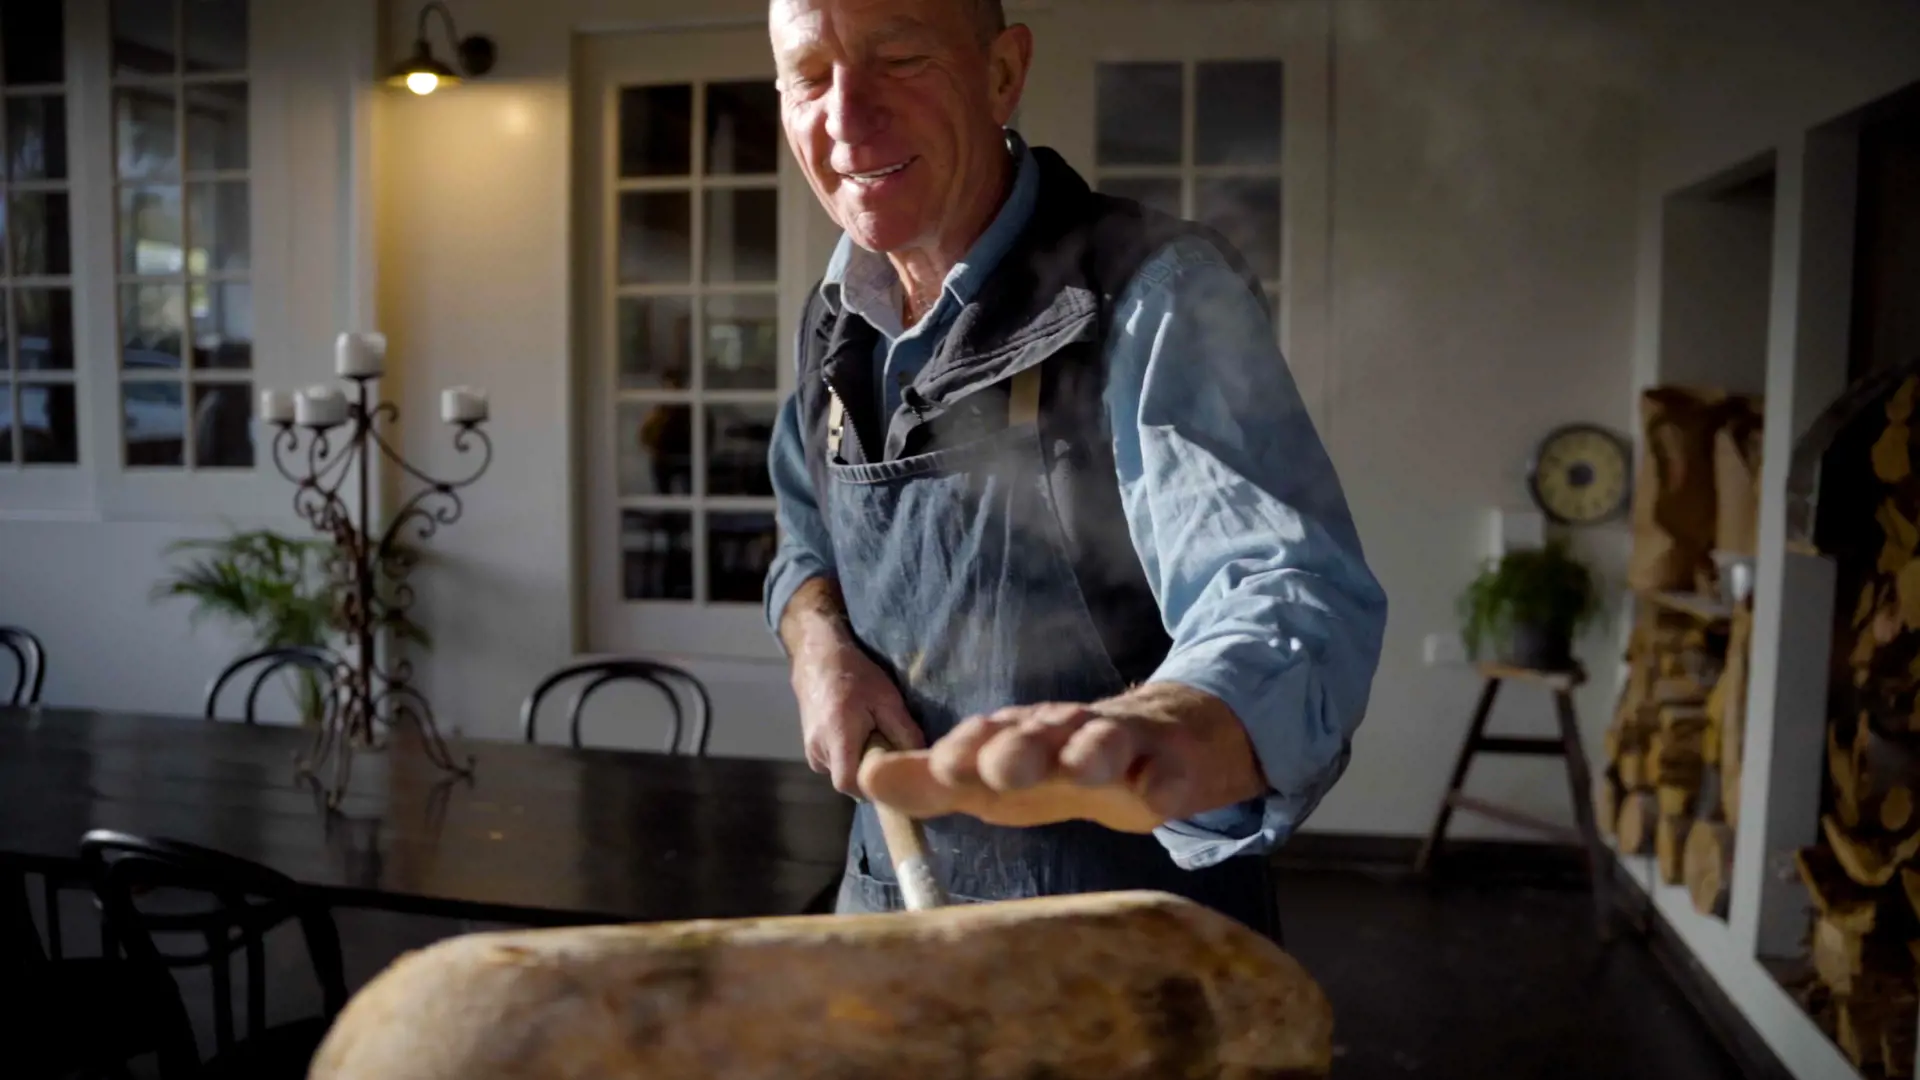 An older man wearing a denim apron and a blue shirt pulls a freshly cooked loaf of handmade bread from the oven.